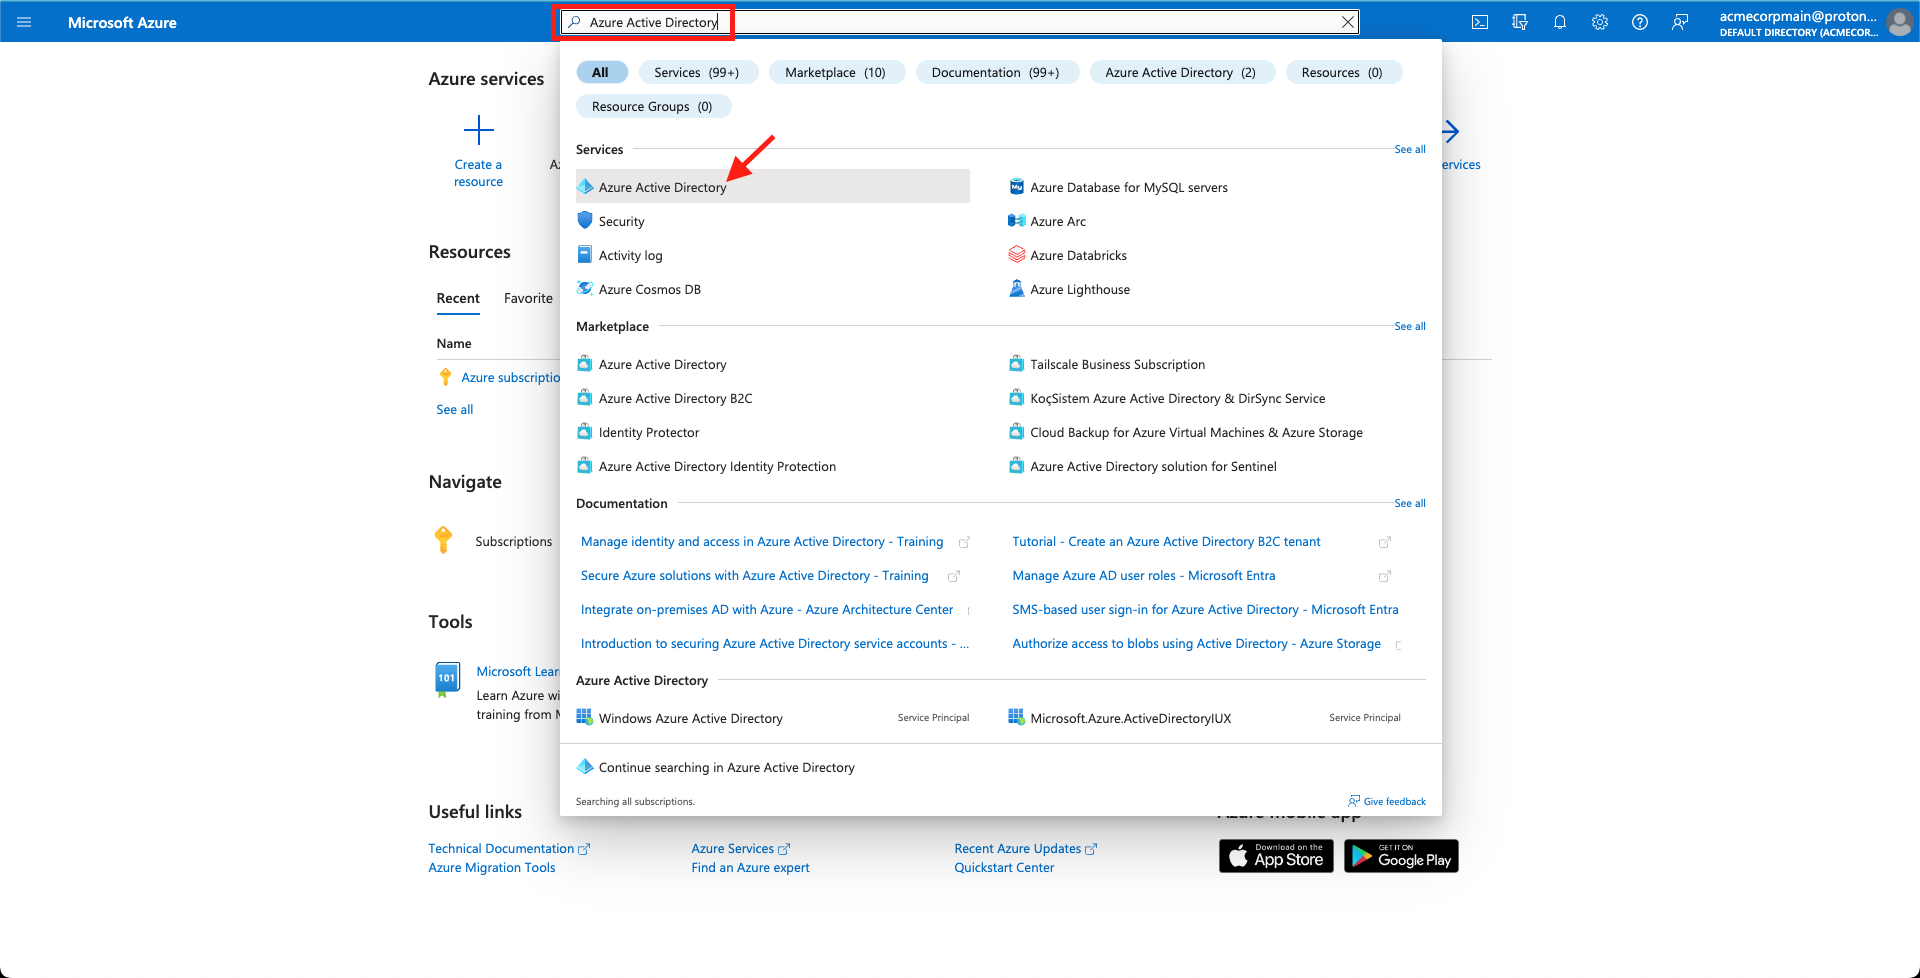 Search for and select 'Azure Active Directory' in Azure